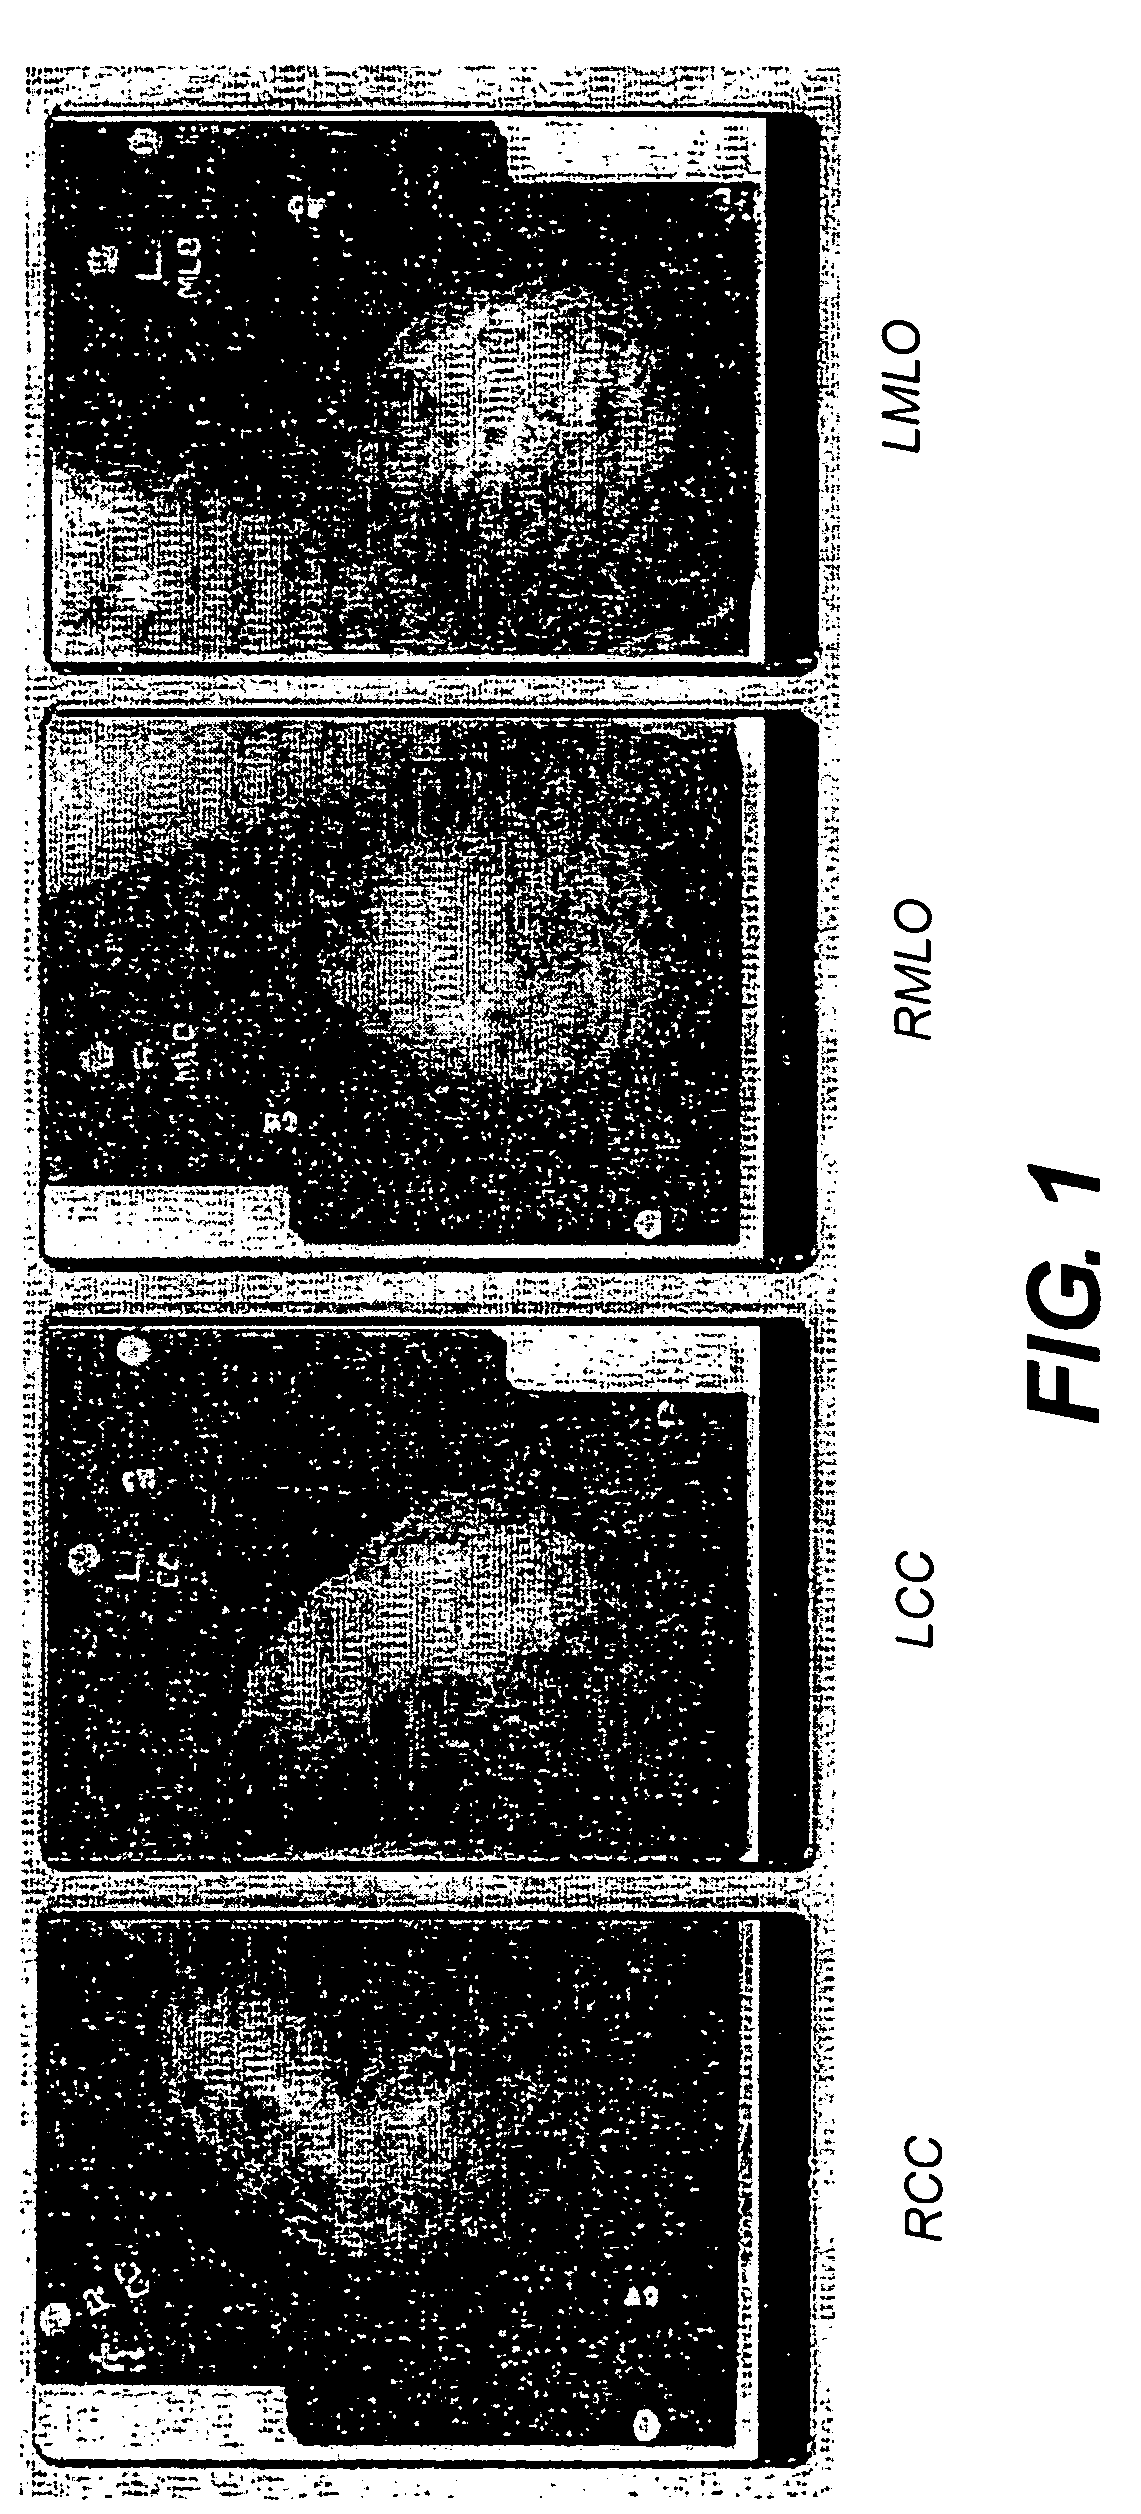 System and method for assigning mammographic view and laterality to individual images in groups of digitized mammograms